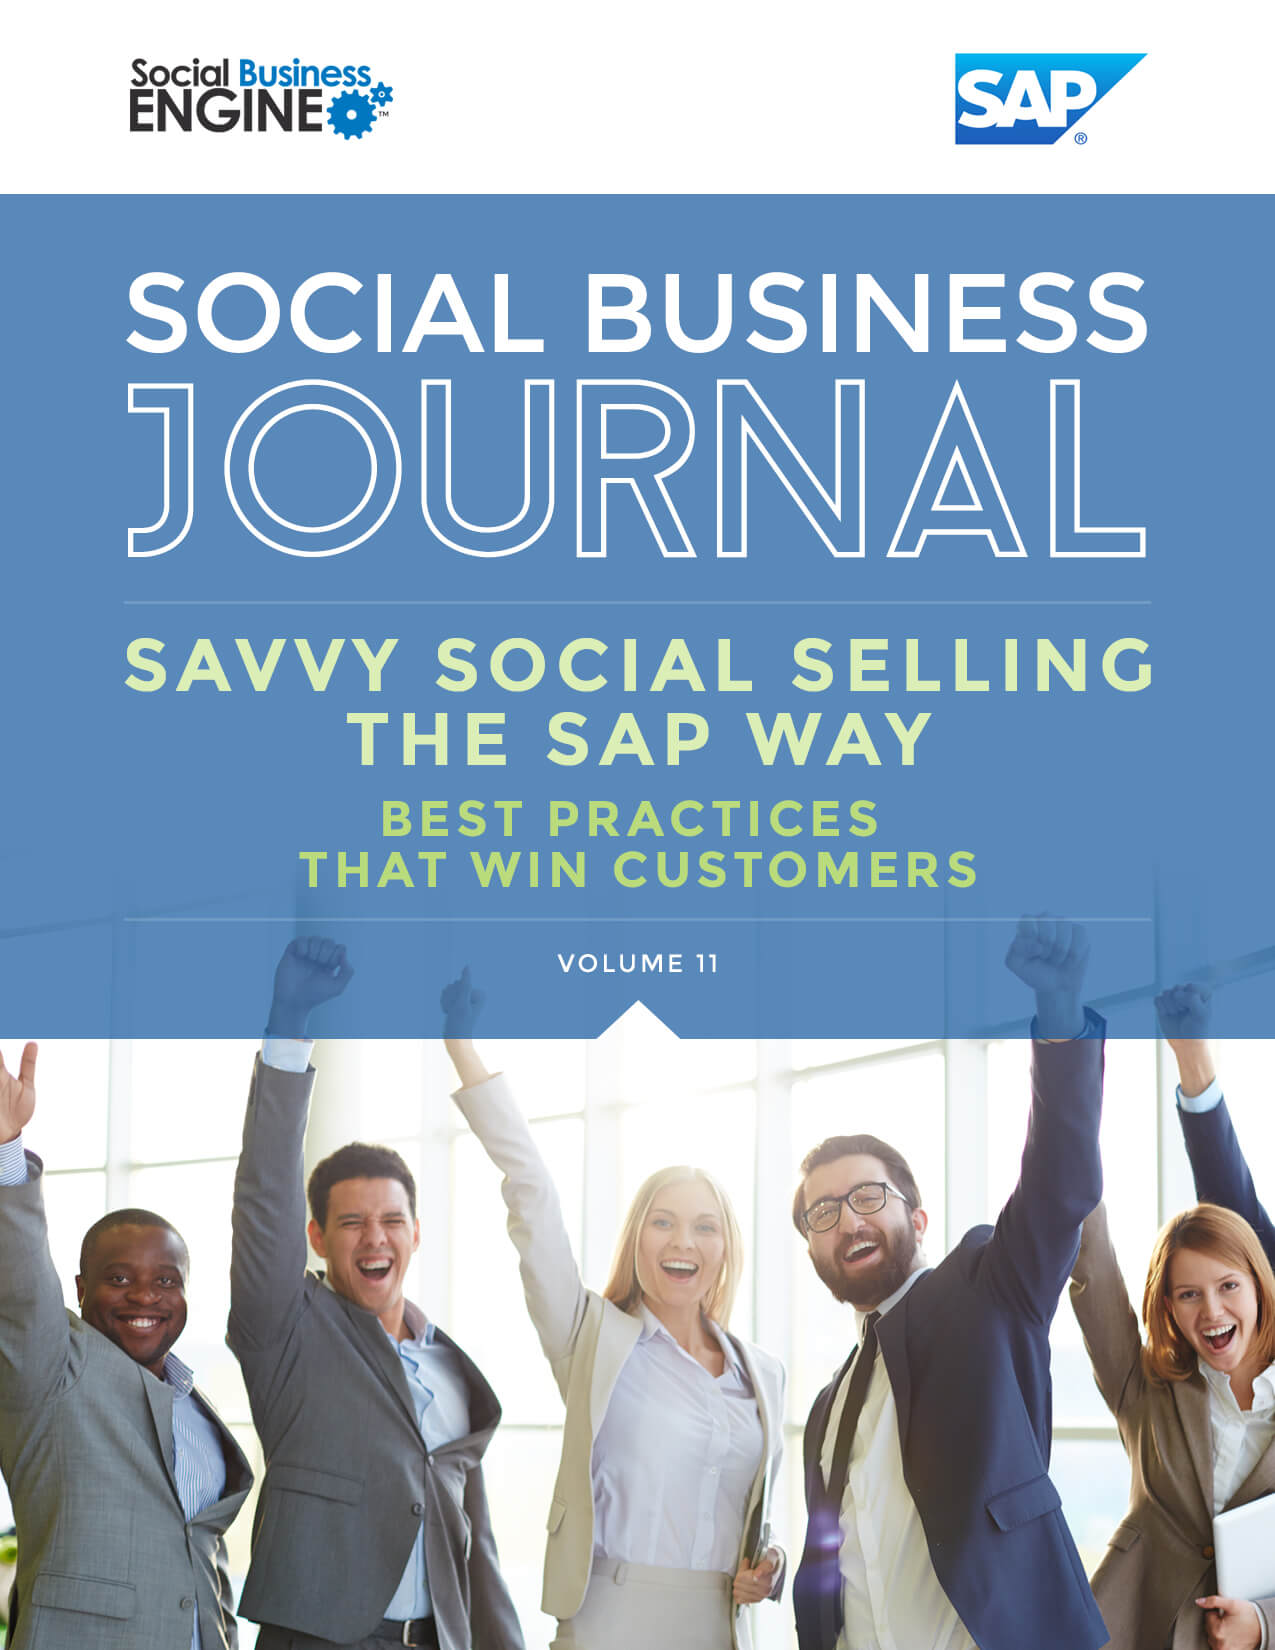 Social Business Journal Vol. 11 - Savvy Social Selling the SAP Way: Best Practices That Win Customers